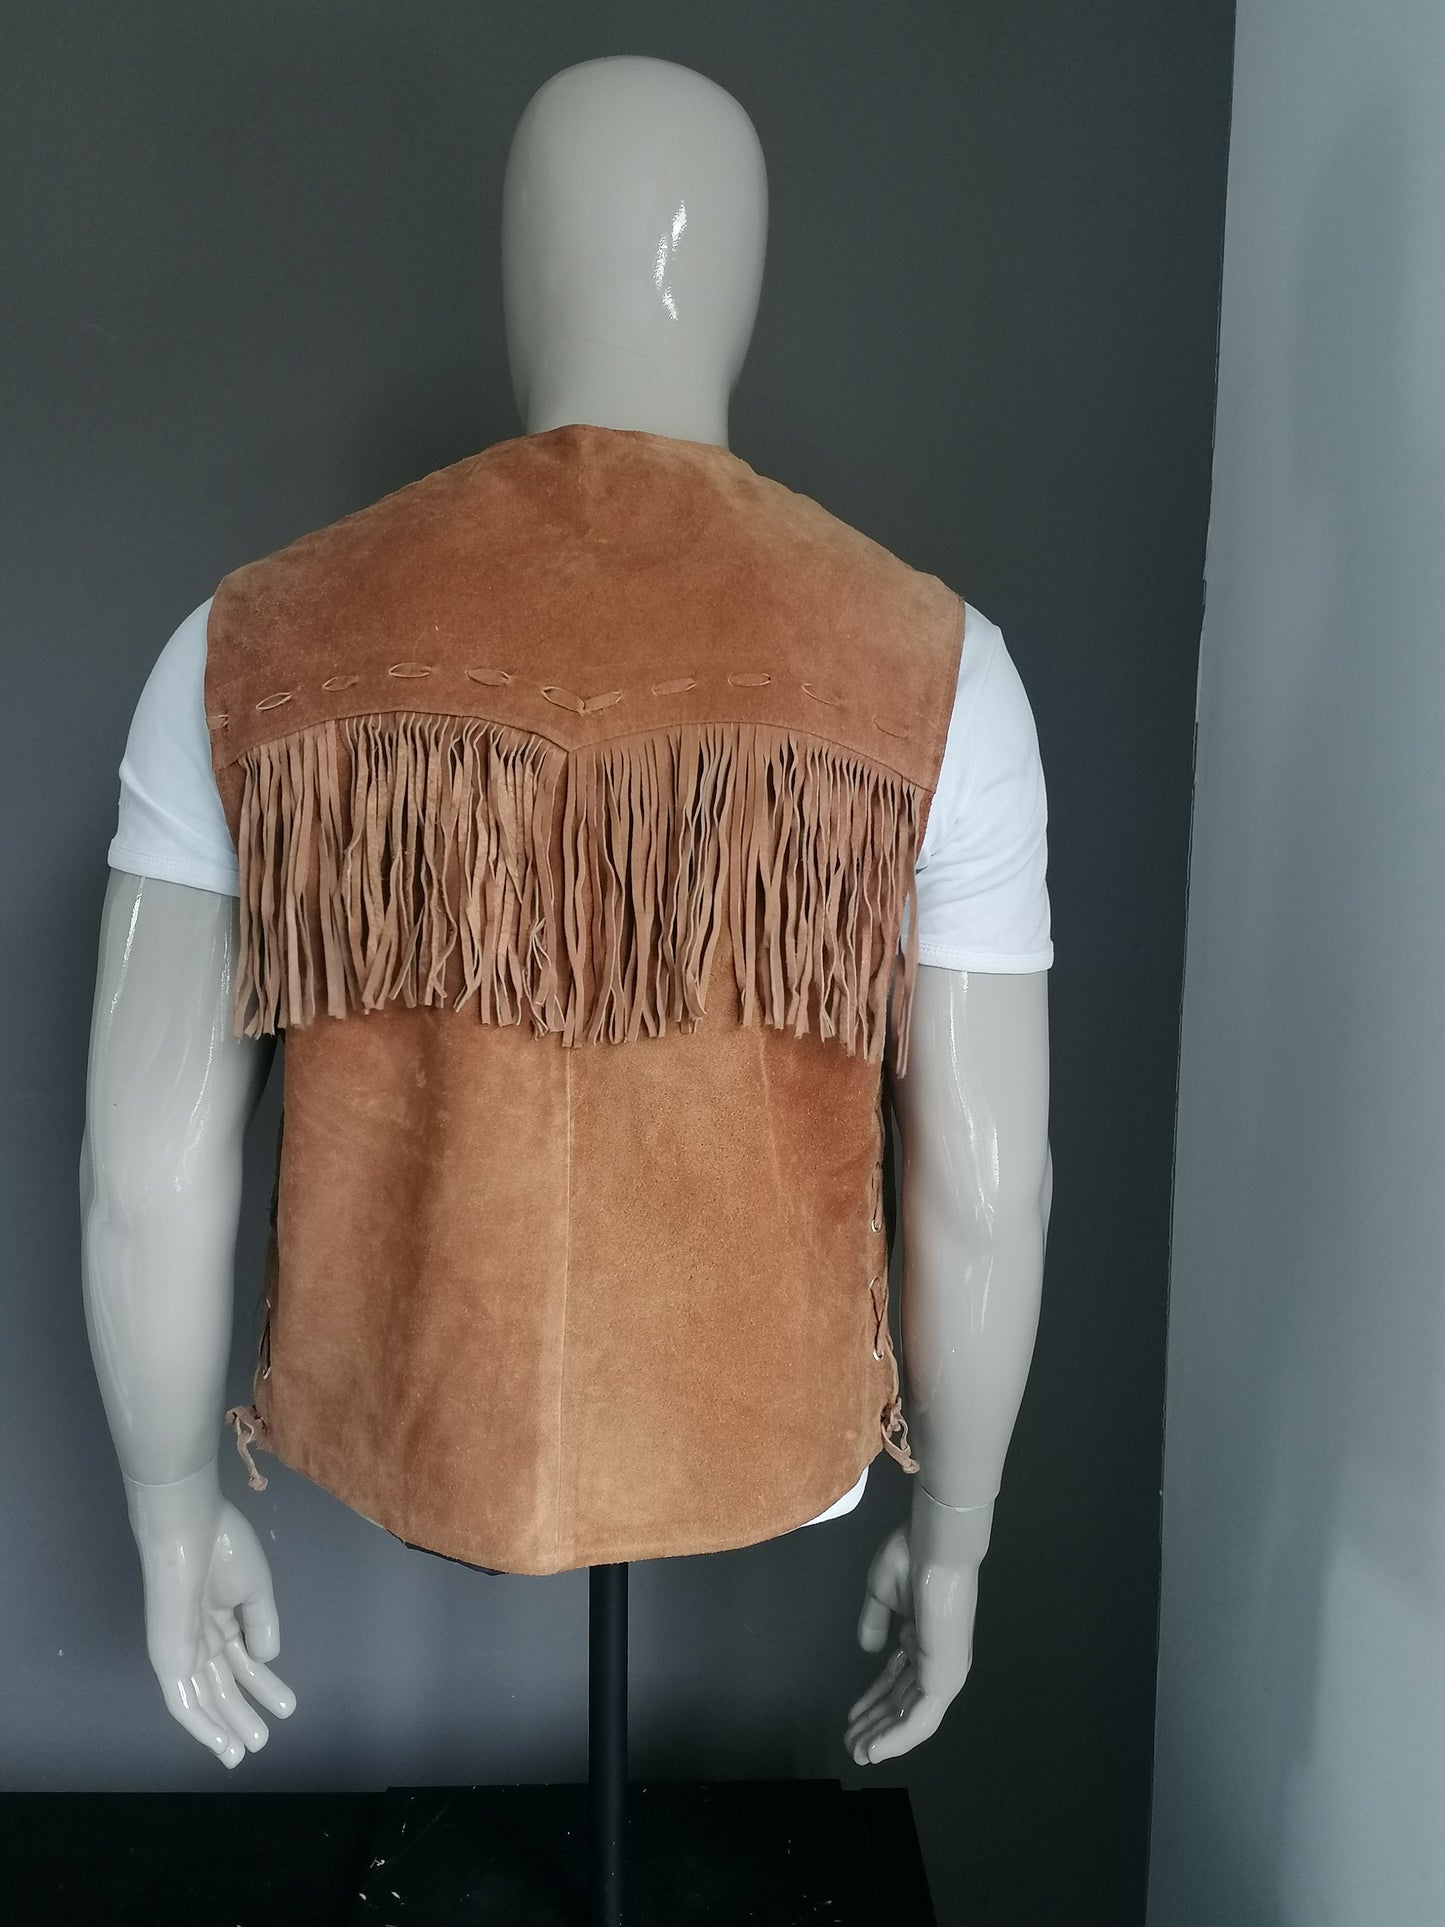 C. County leather suede waistcoat with fringes and press studs and veter accents side. Brown colored. Size L.